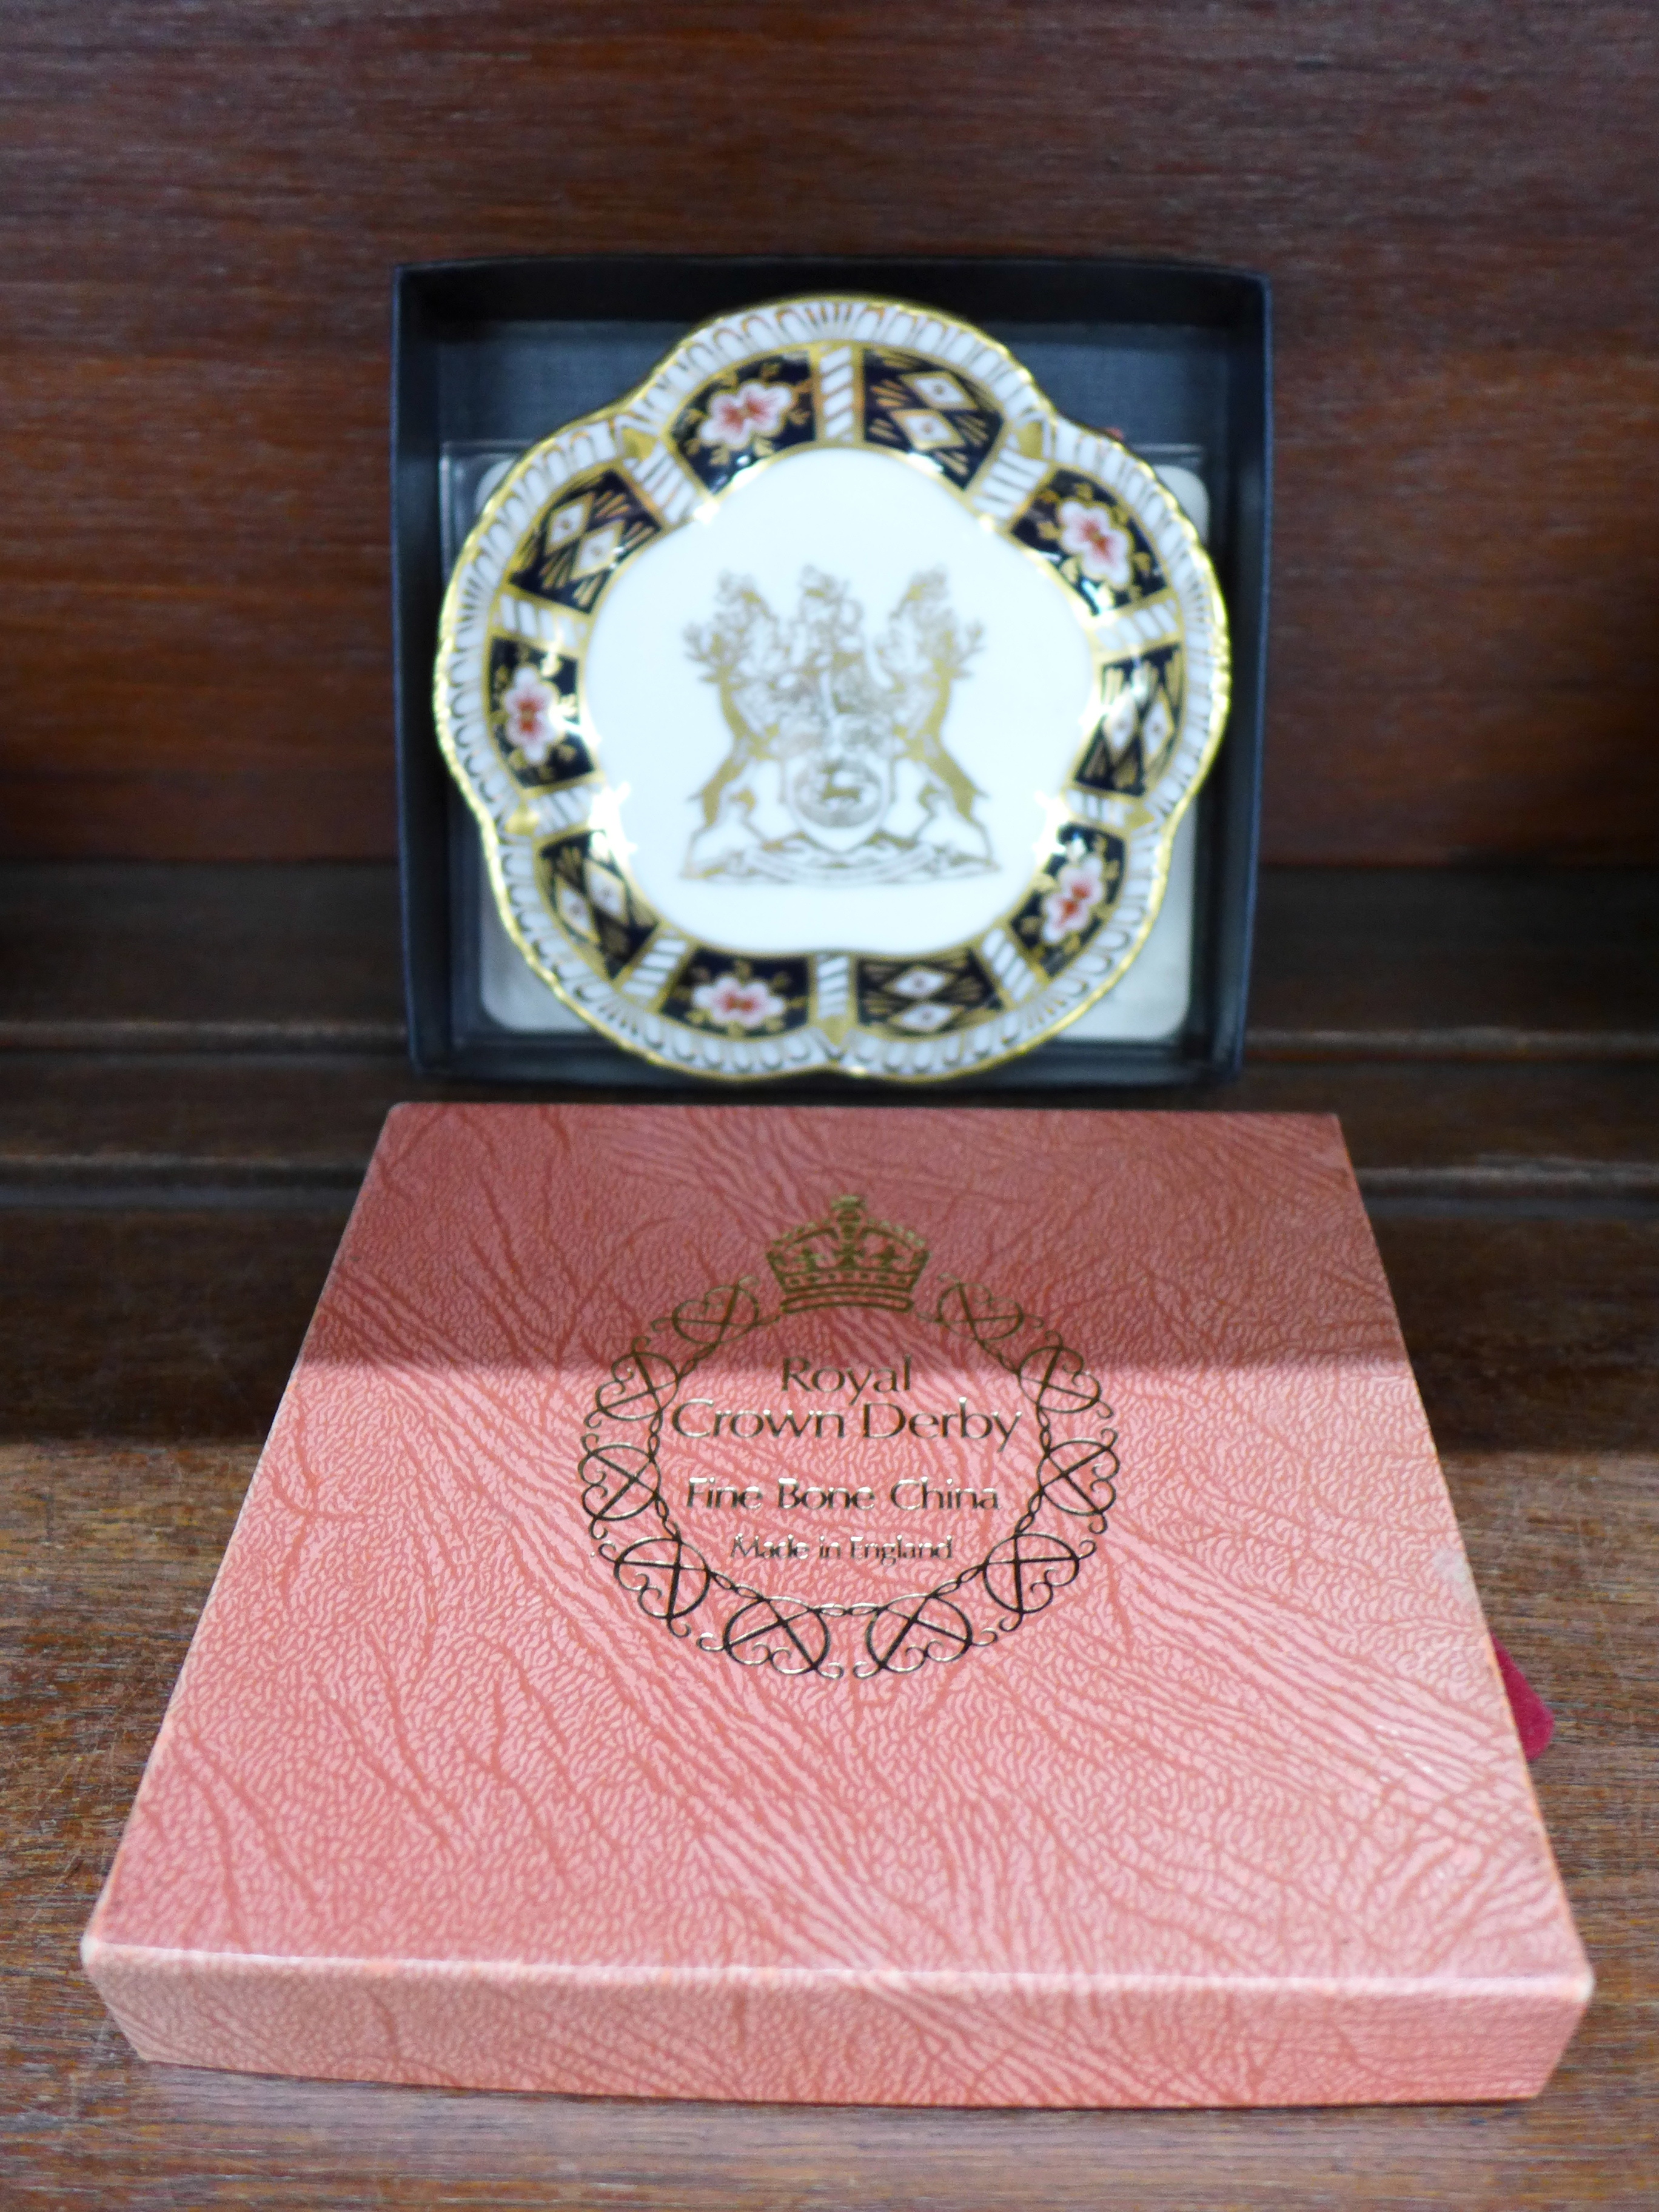 A Royal Crown Derby commemorative tray, boxed,